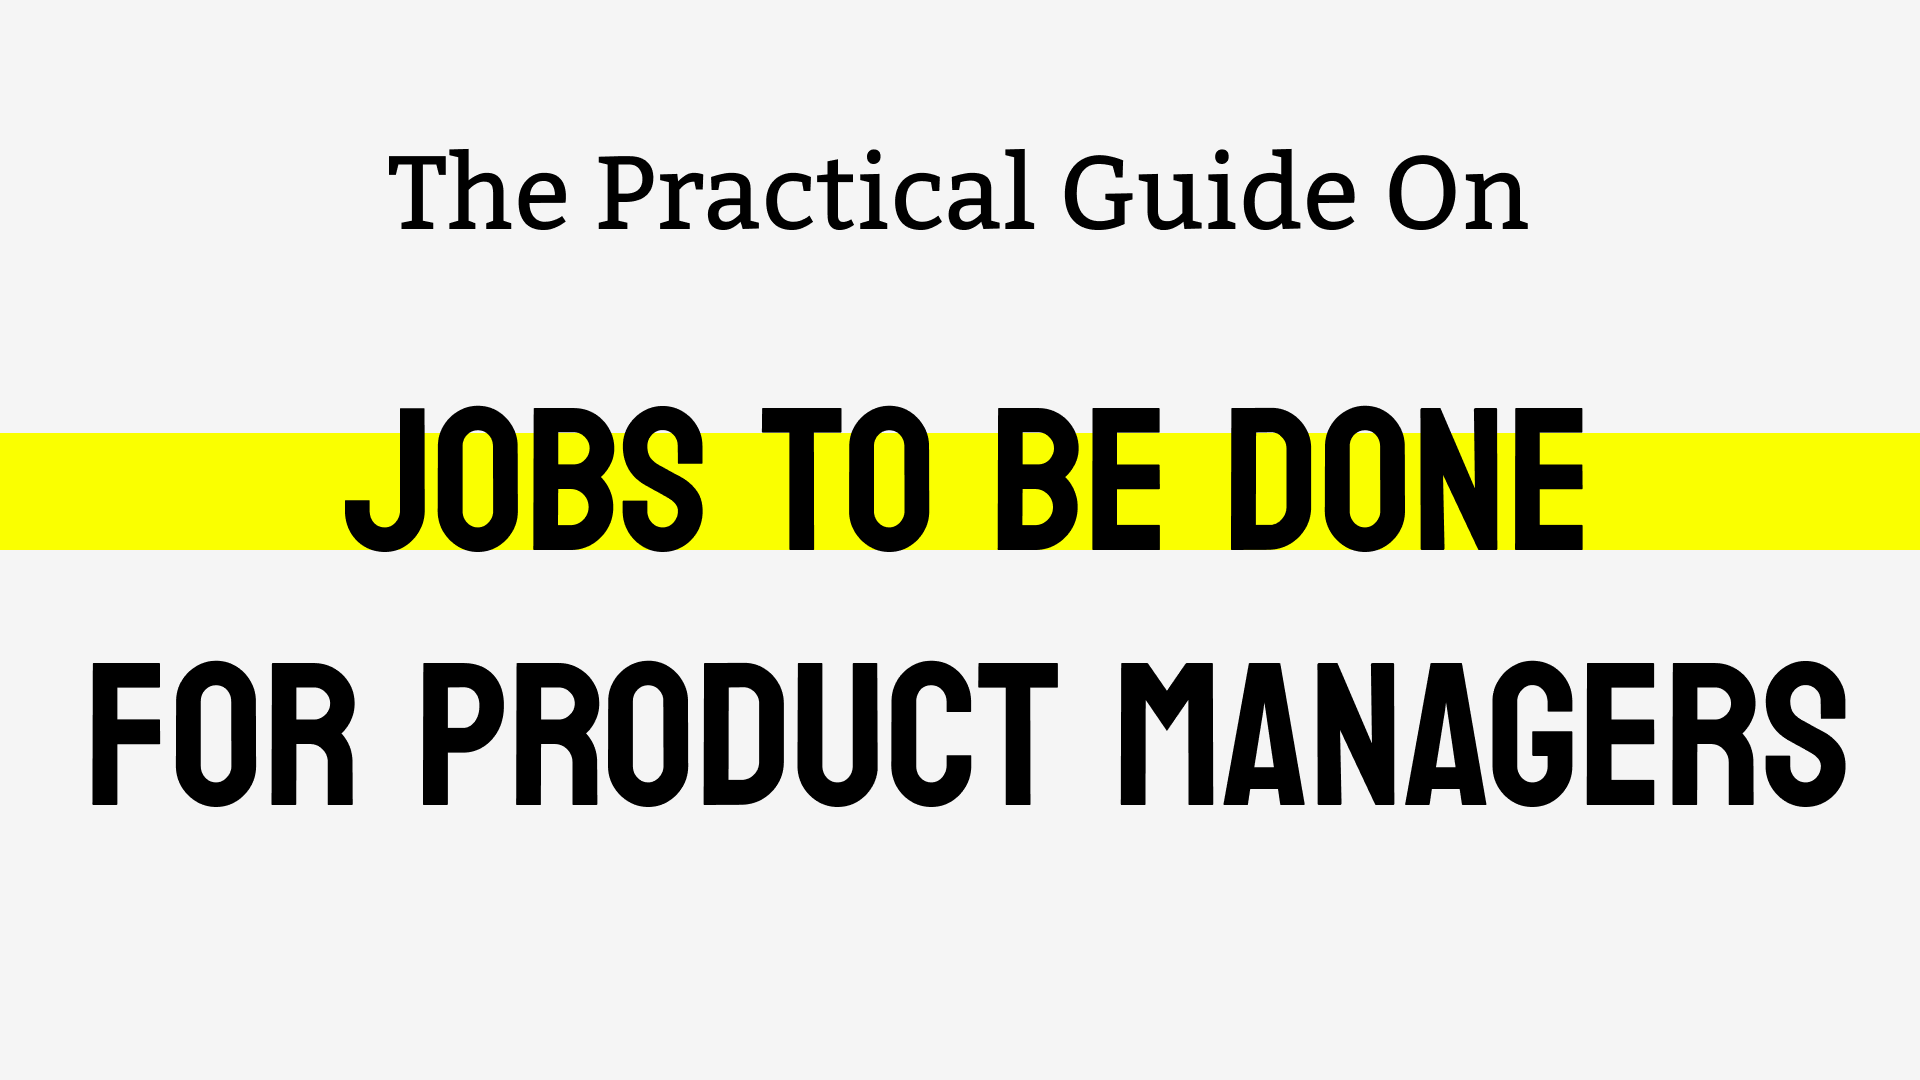 Jobs To Be Done – The Practical Guide for Product Managers